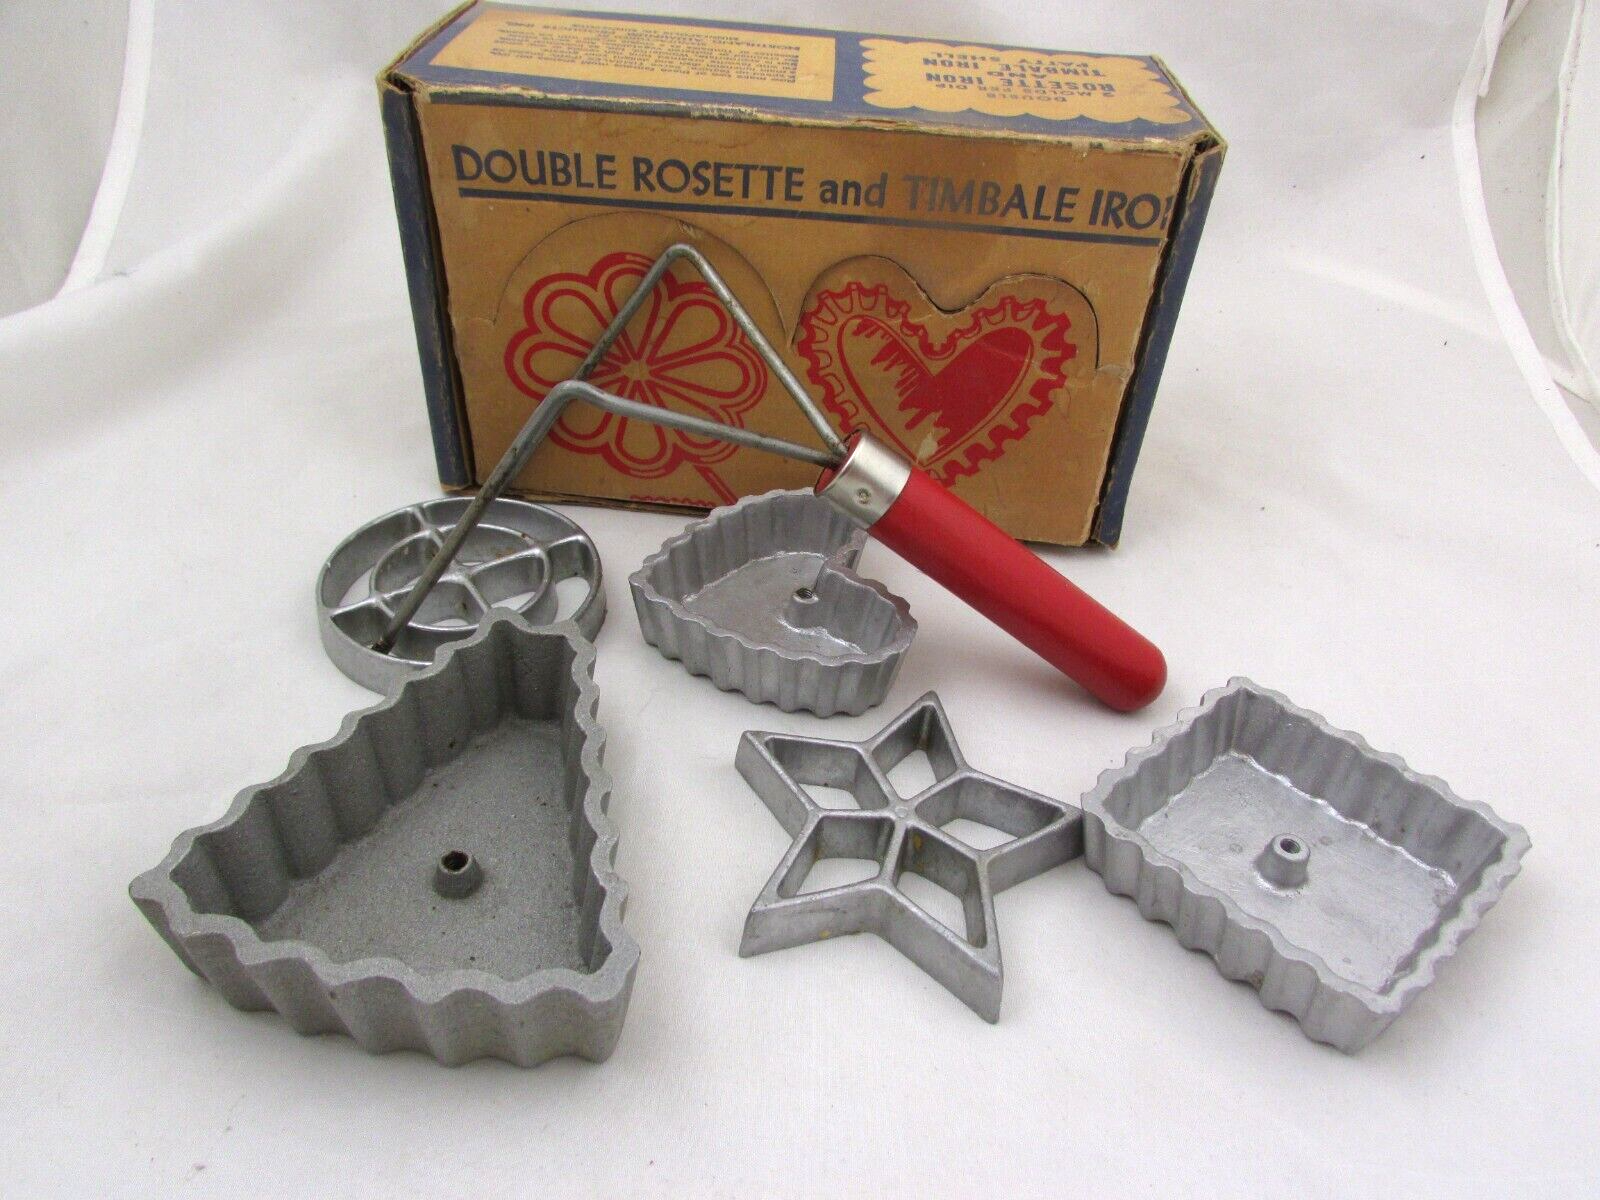 Vintage Nordic Ware Double Rosette and Timbale Iron 5 Patty Shells Cookie Mold - $11.52